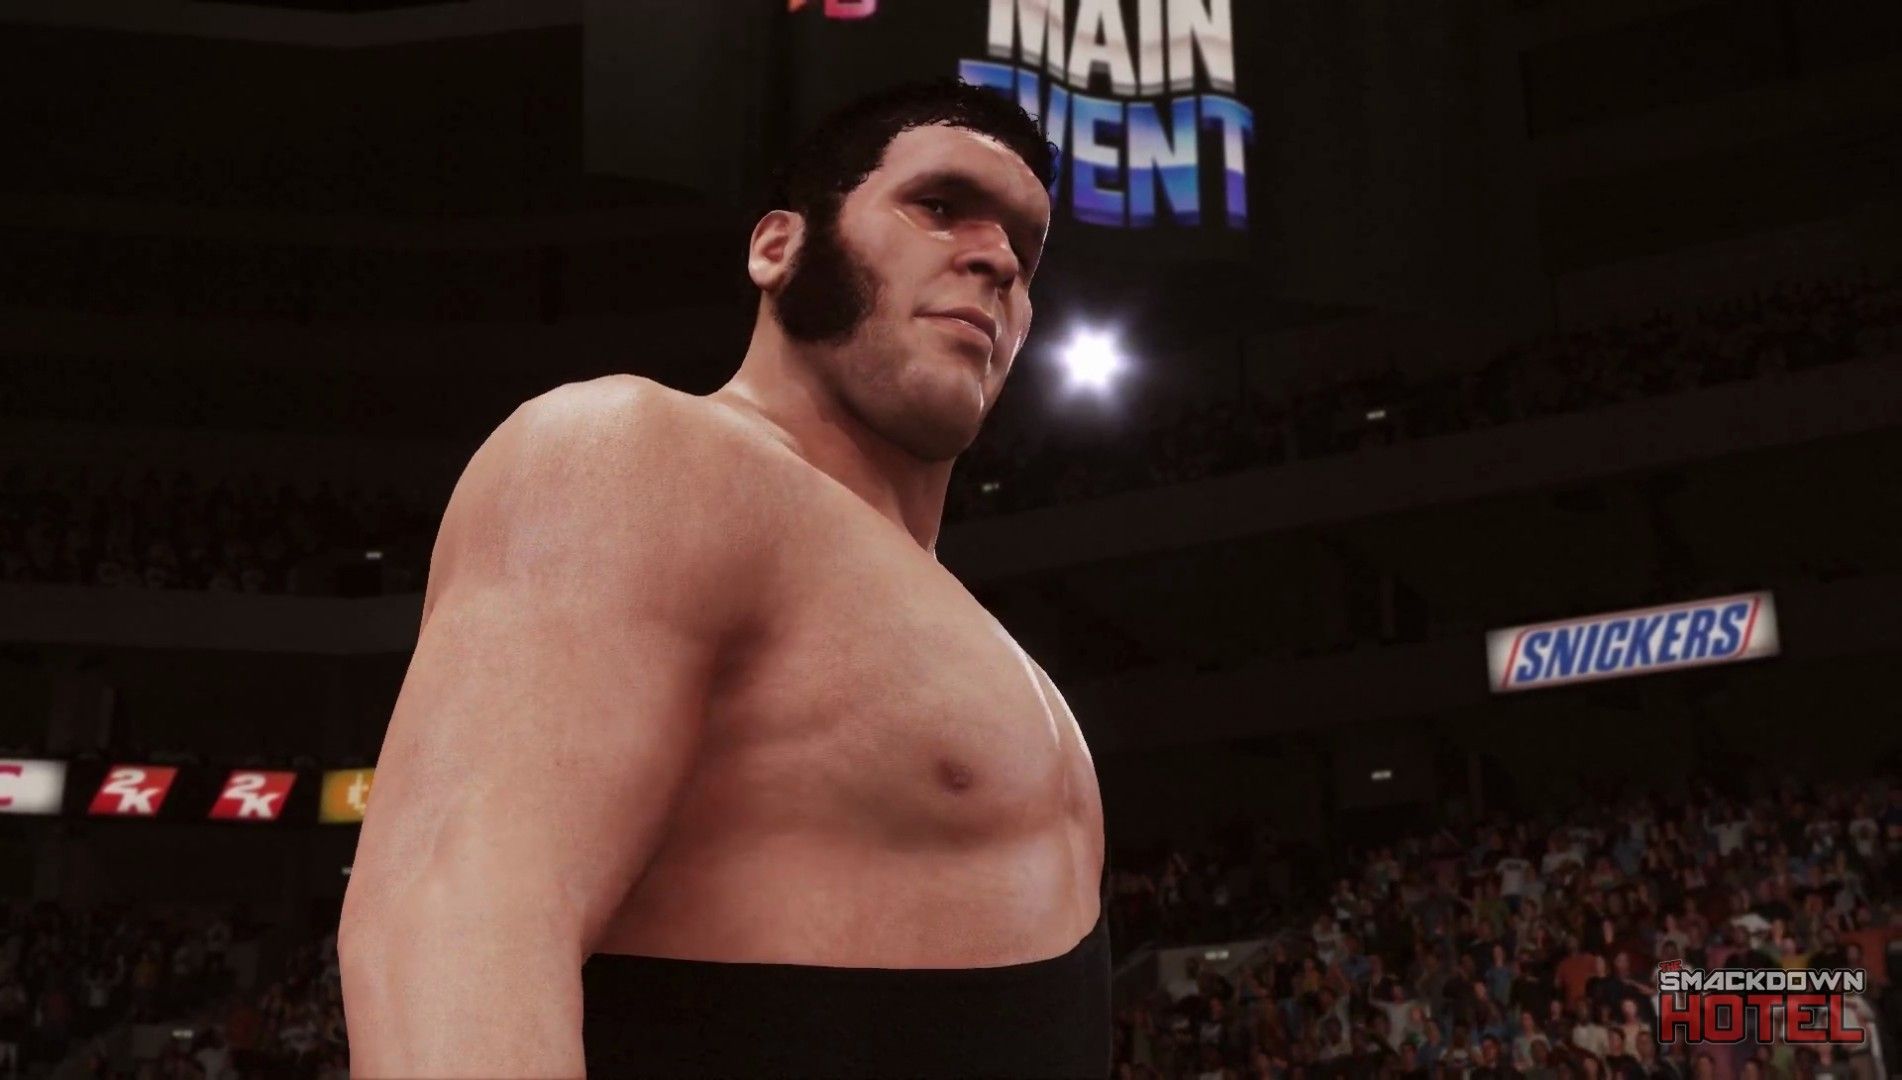 Free download Andre The Giant WWE 2K18 Roster [1902x1080] for your Desktop, Mobile & Tablet. Explore André The Giant Wallpaper. André The Giant Wallpaper, Giant Wallpaper, Andre Iguodala Wallpaper